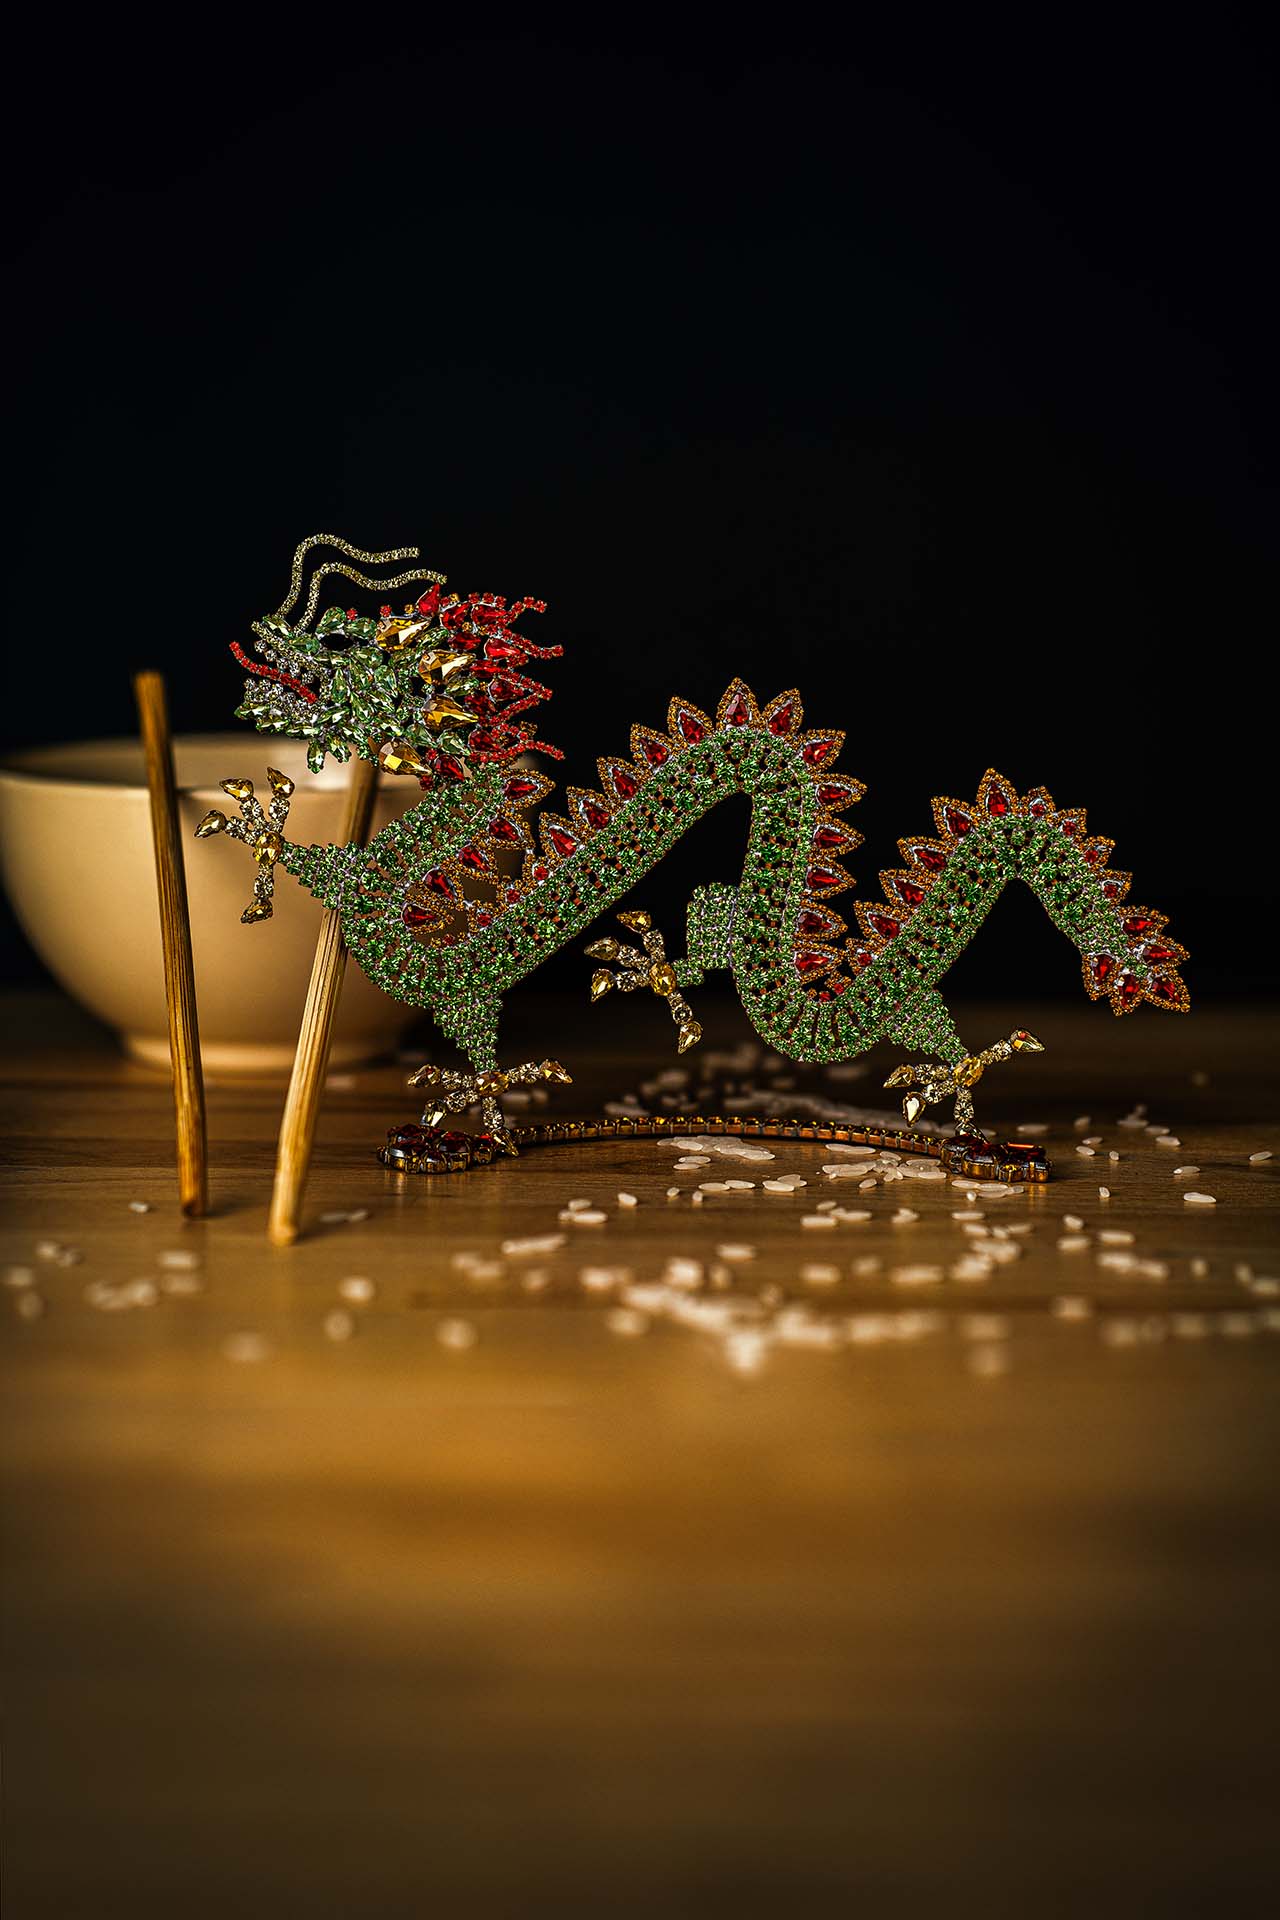 A beautiful Chinese dragon made of rhinestones in red and green